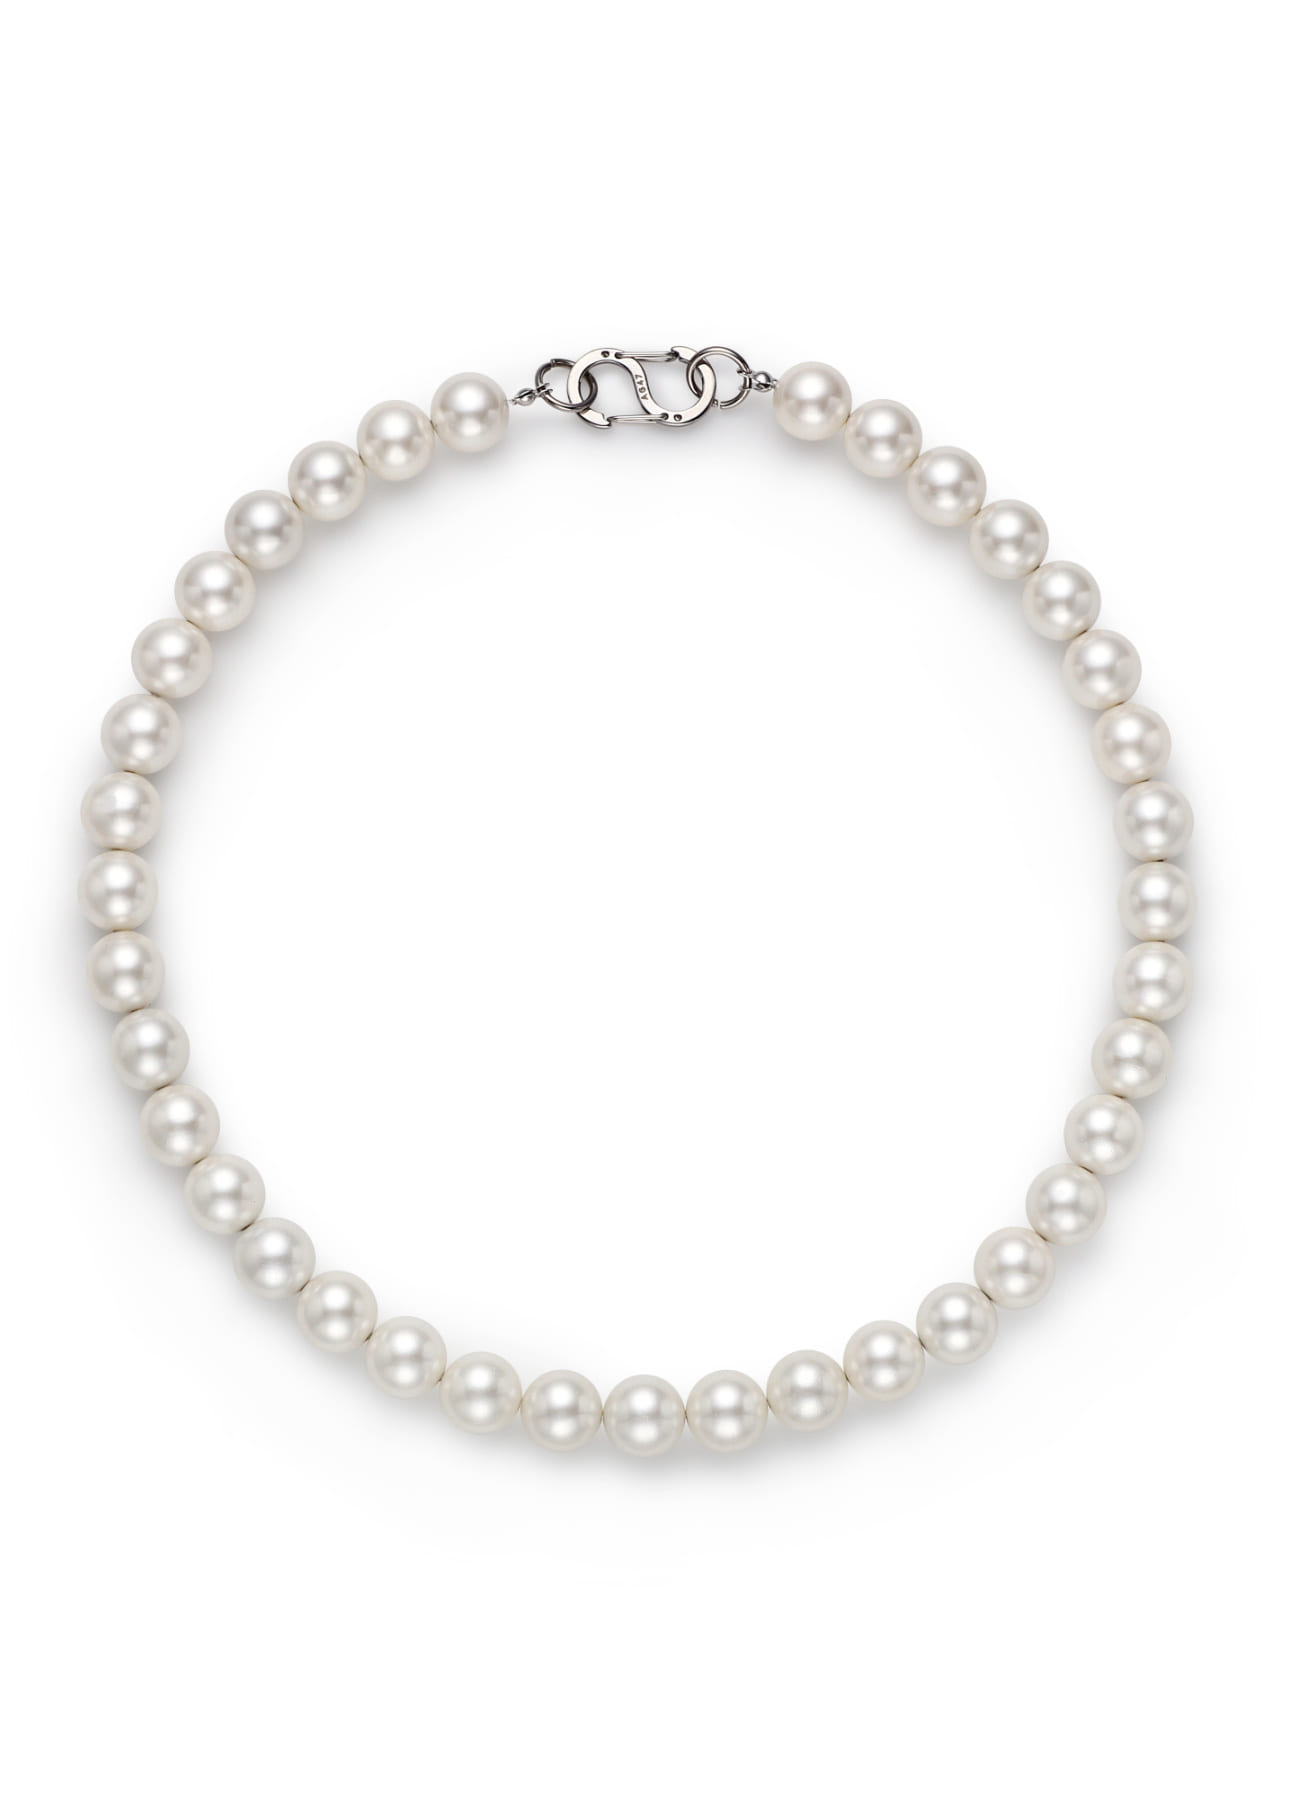 B.W.P Necklace-07 Pearl 12mm